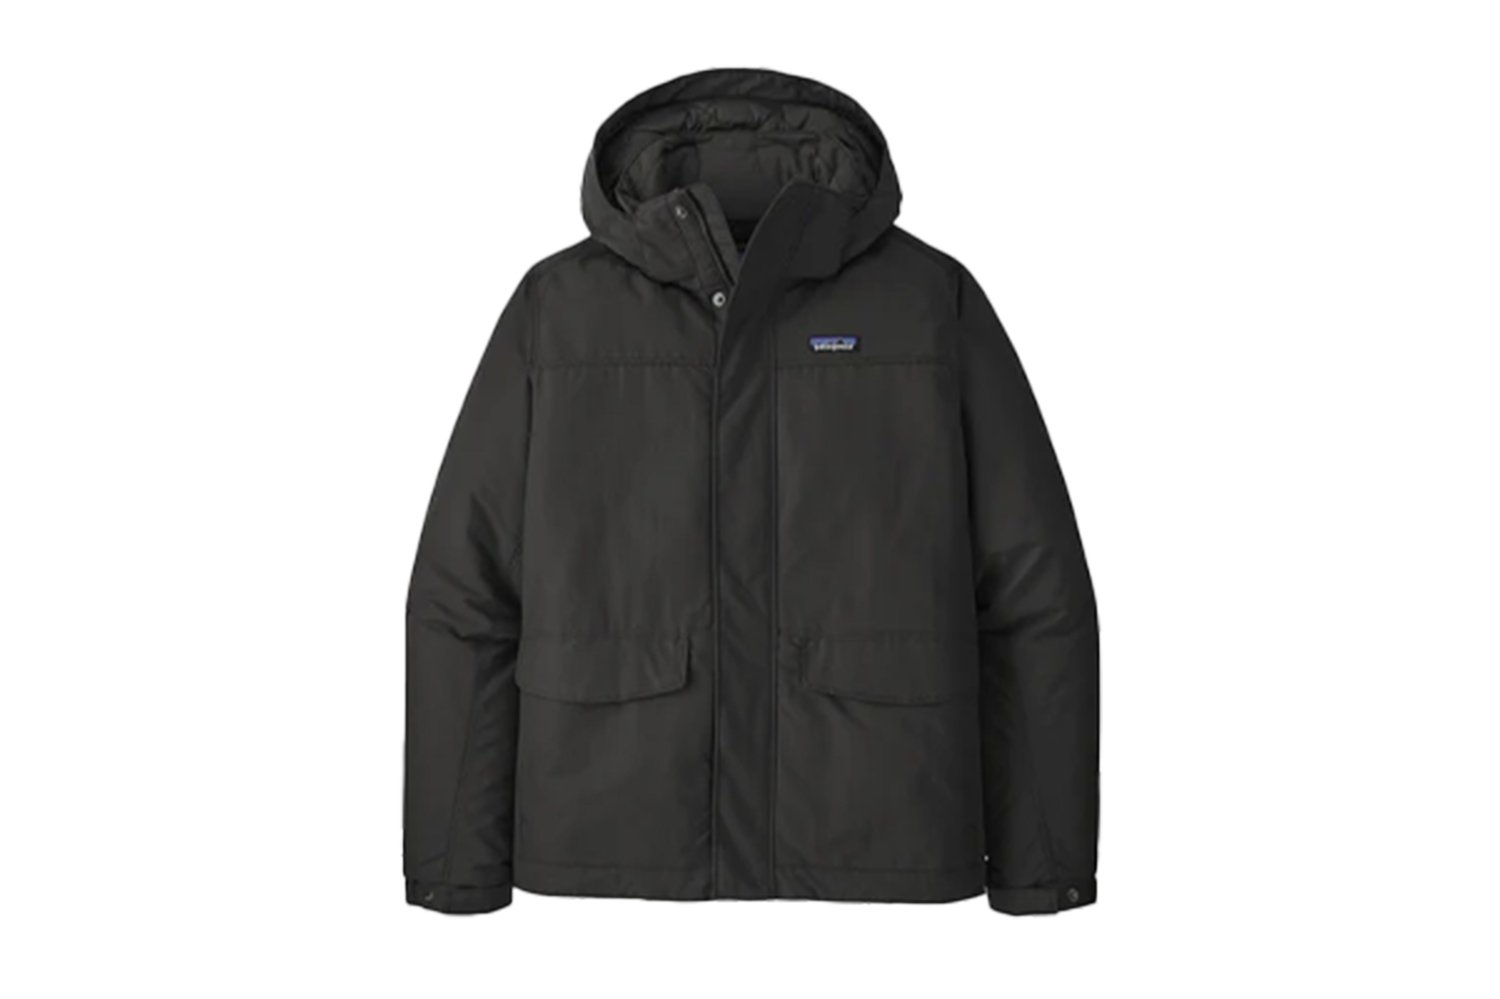 patagonia/メンズ・イスマス・ジャケット<img class='new_mark_img2' src='https://img.shop-pro.jp/img/new/icons1.gif' style='border:none;display:inline;margin:0px;padding:0px;width:auto;' />